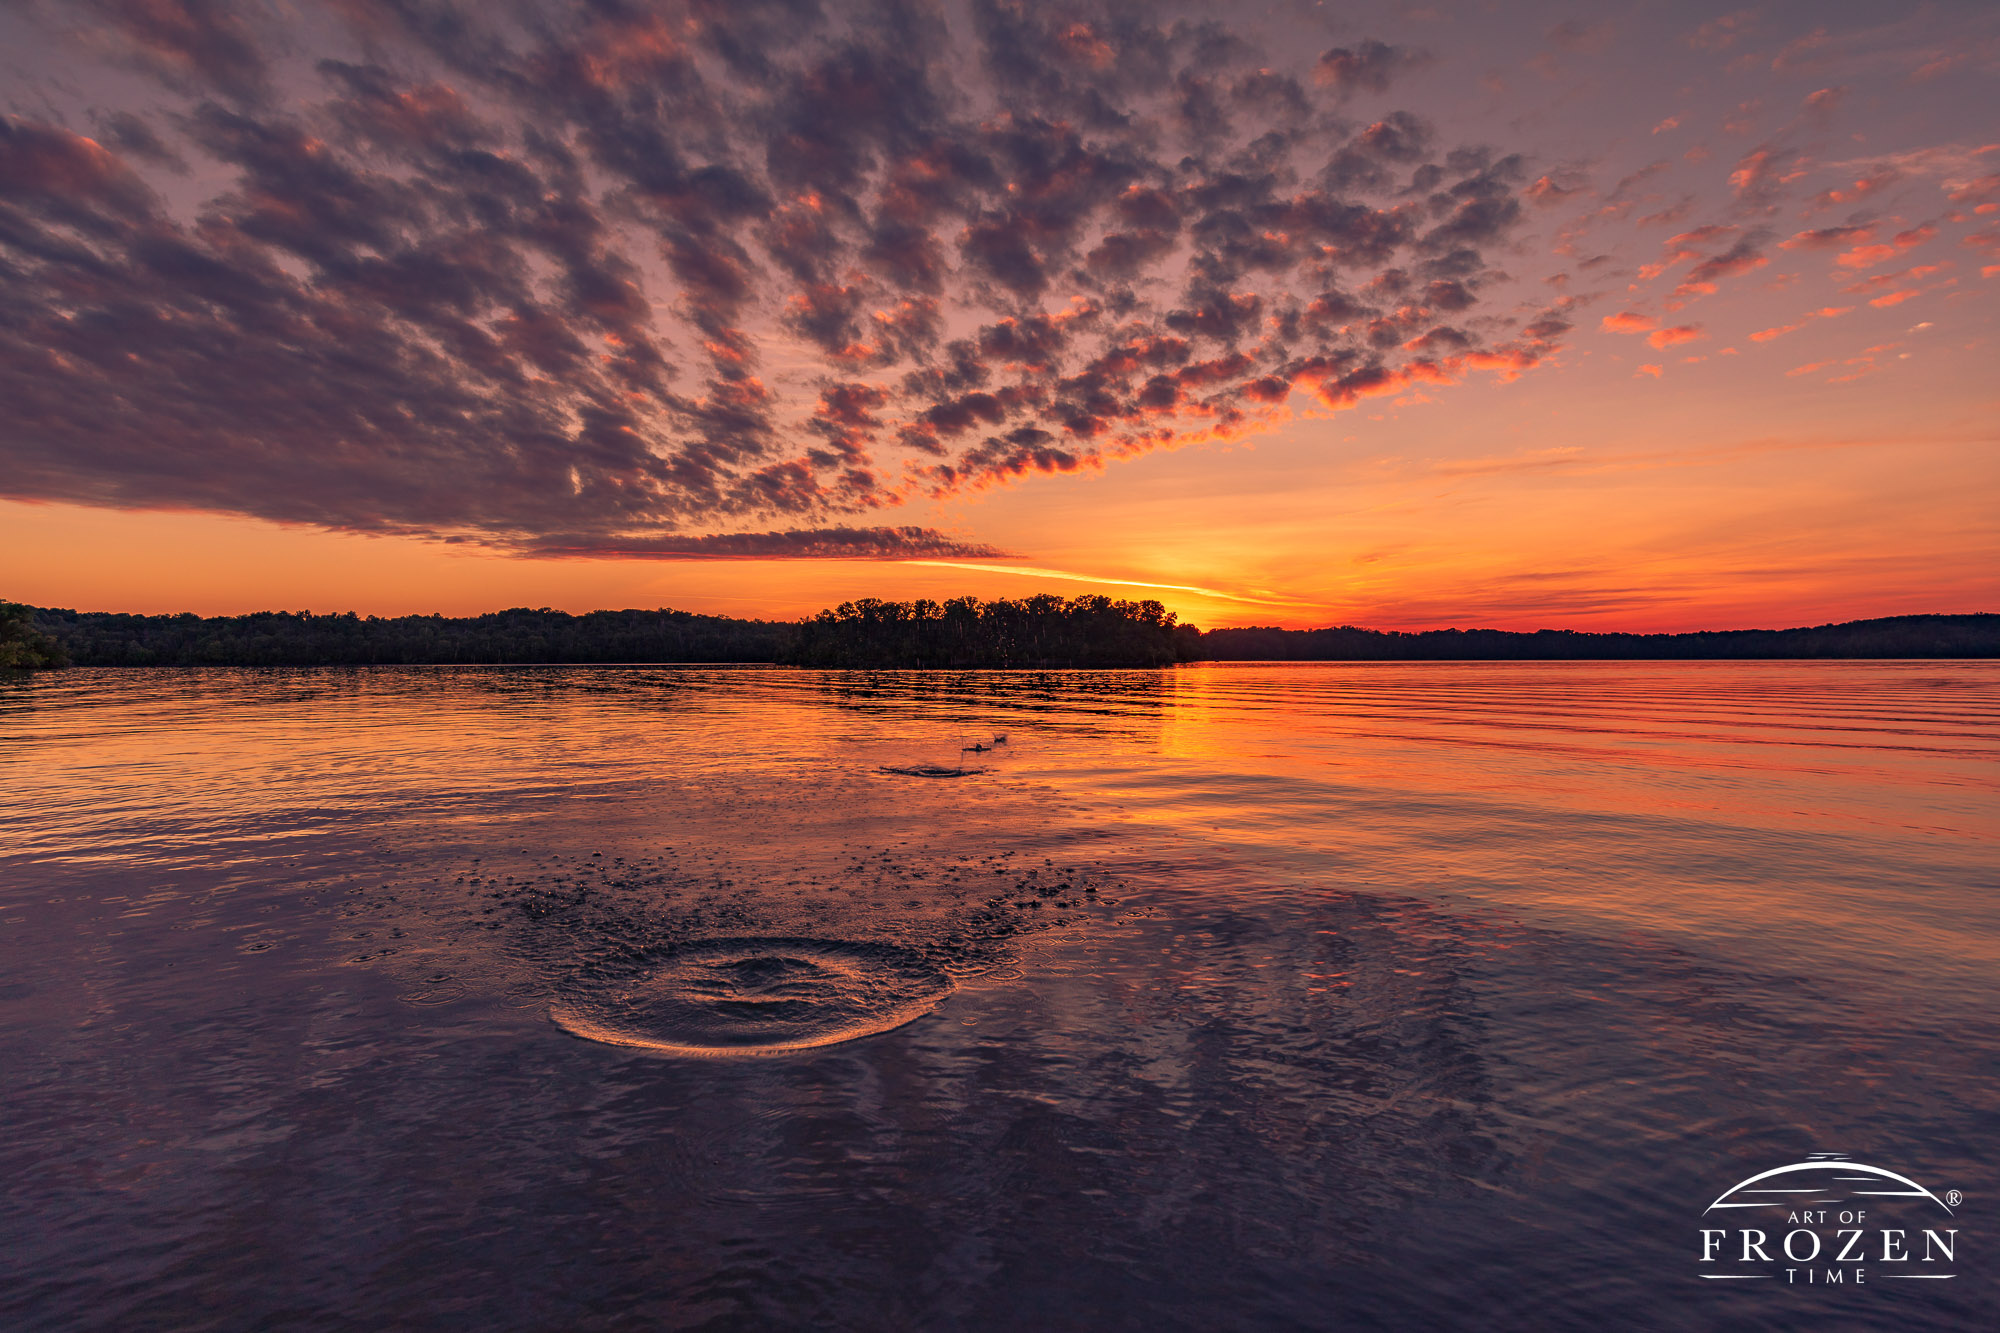 A skipped-rock forms series of concentric circles leading the eye into the colorful sunset